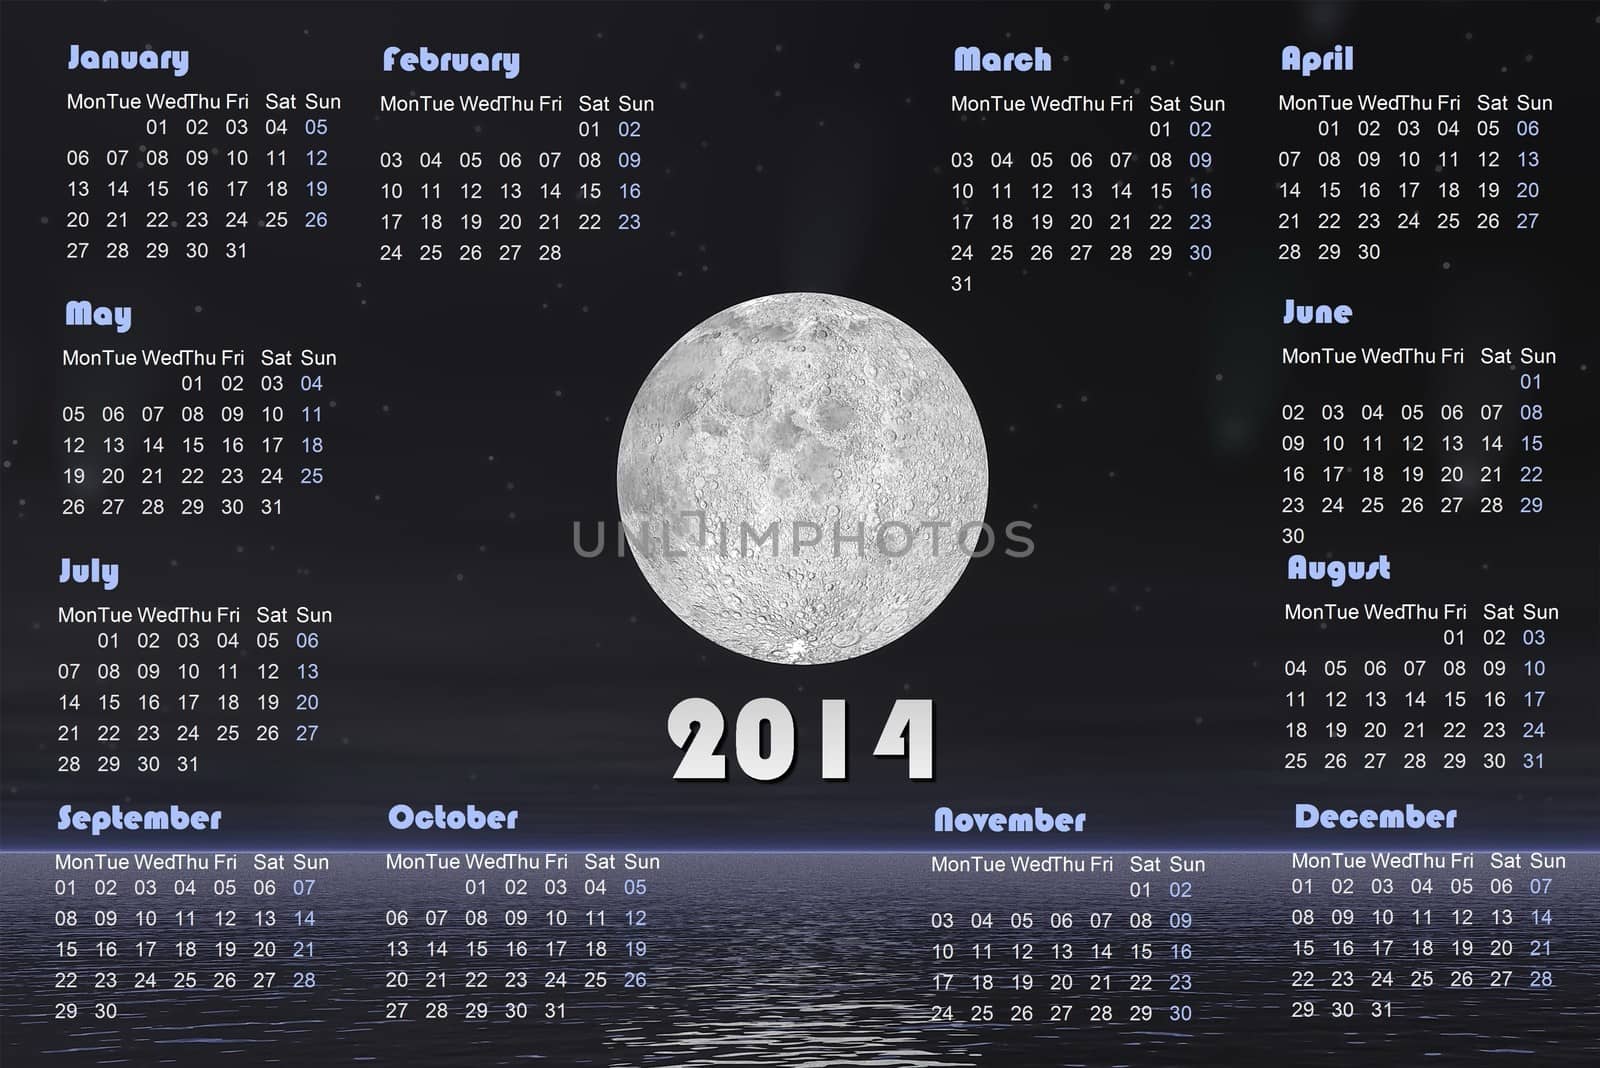 2014 calendar with comets and full moon -3D render by Elenaphotos21